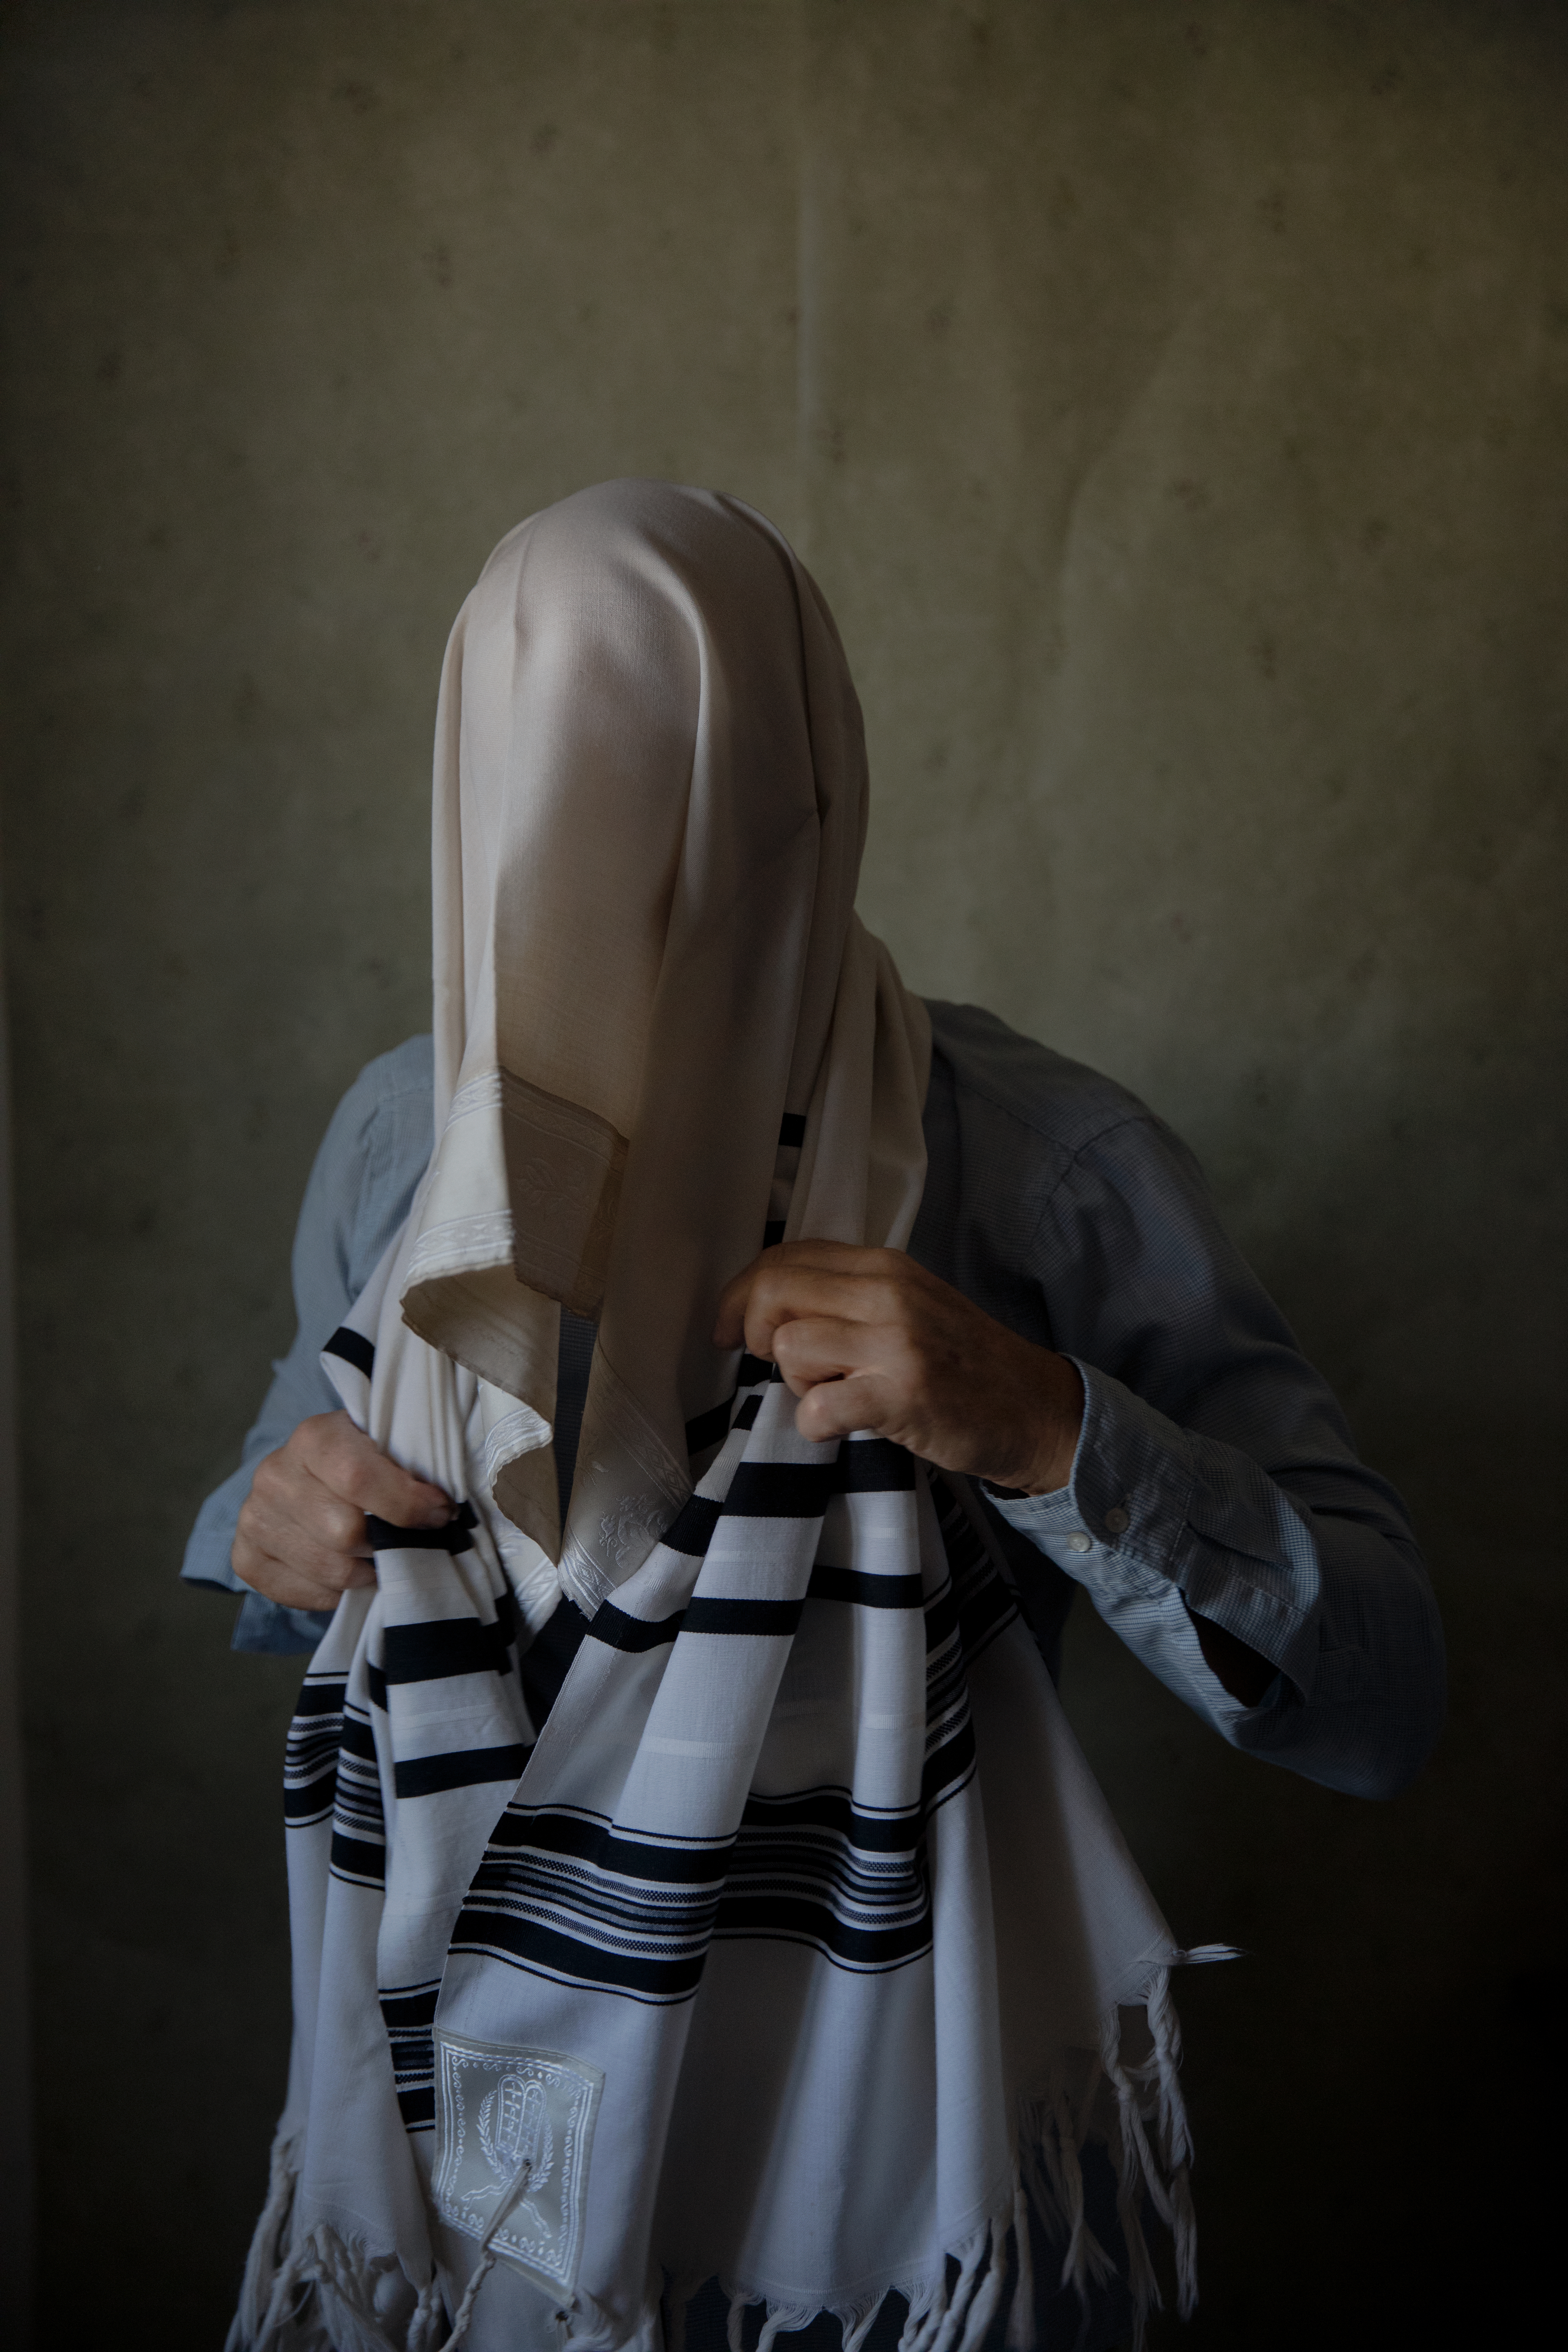 A man poses wrapped in his tallit prayer shawl to symbolise the way he conceals his identity from his religious community in Israel.